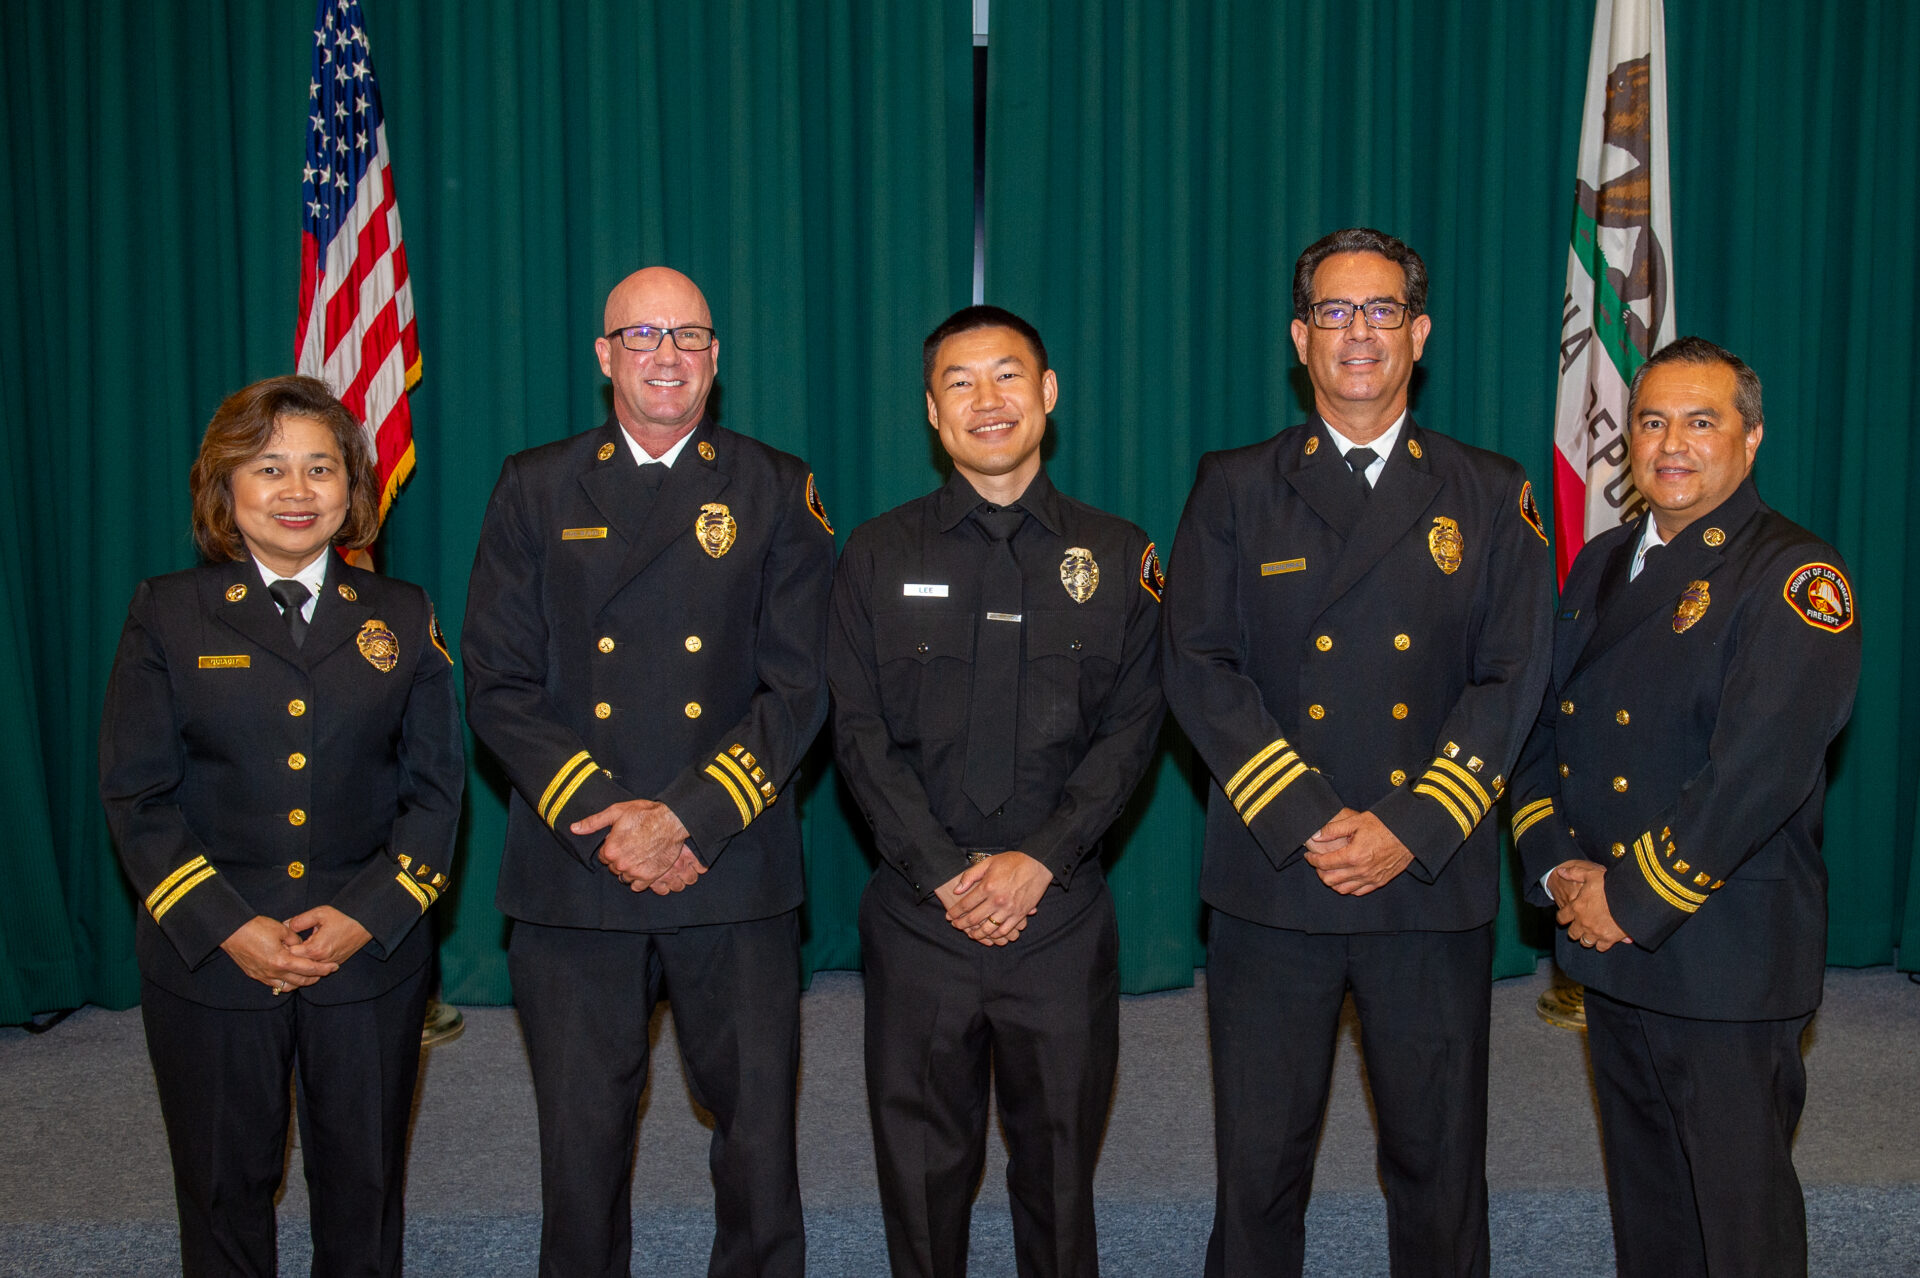 The County of Los Angeles Fire Department’s (LACoFD) Health Hazardous Materials Division (HHMD) graduated a class of three hazardous materials specialists from the HHMD training academy.